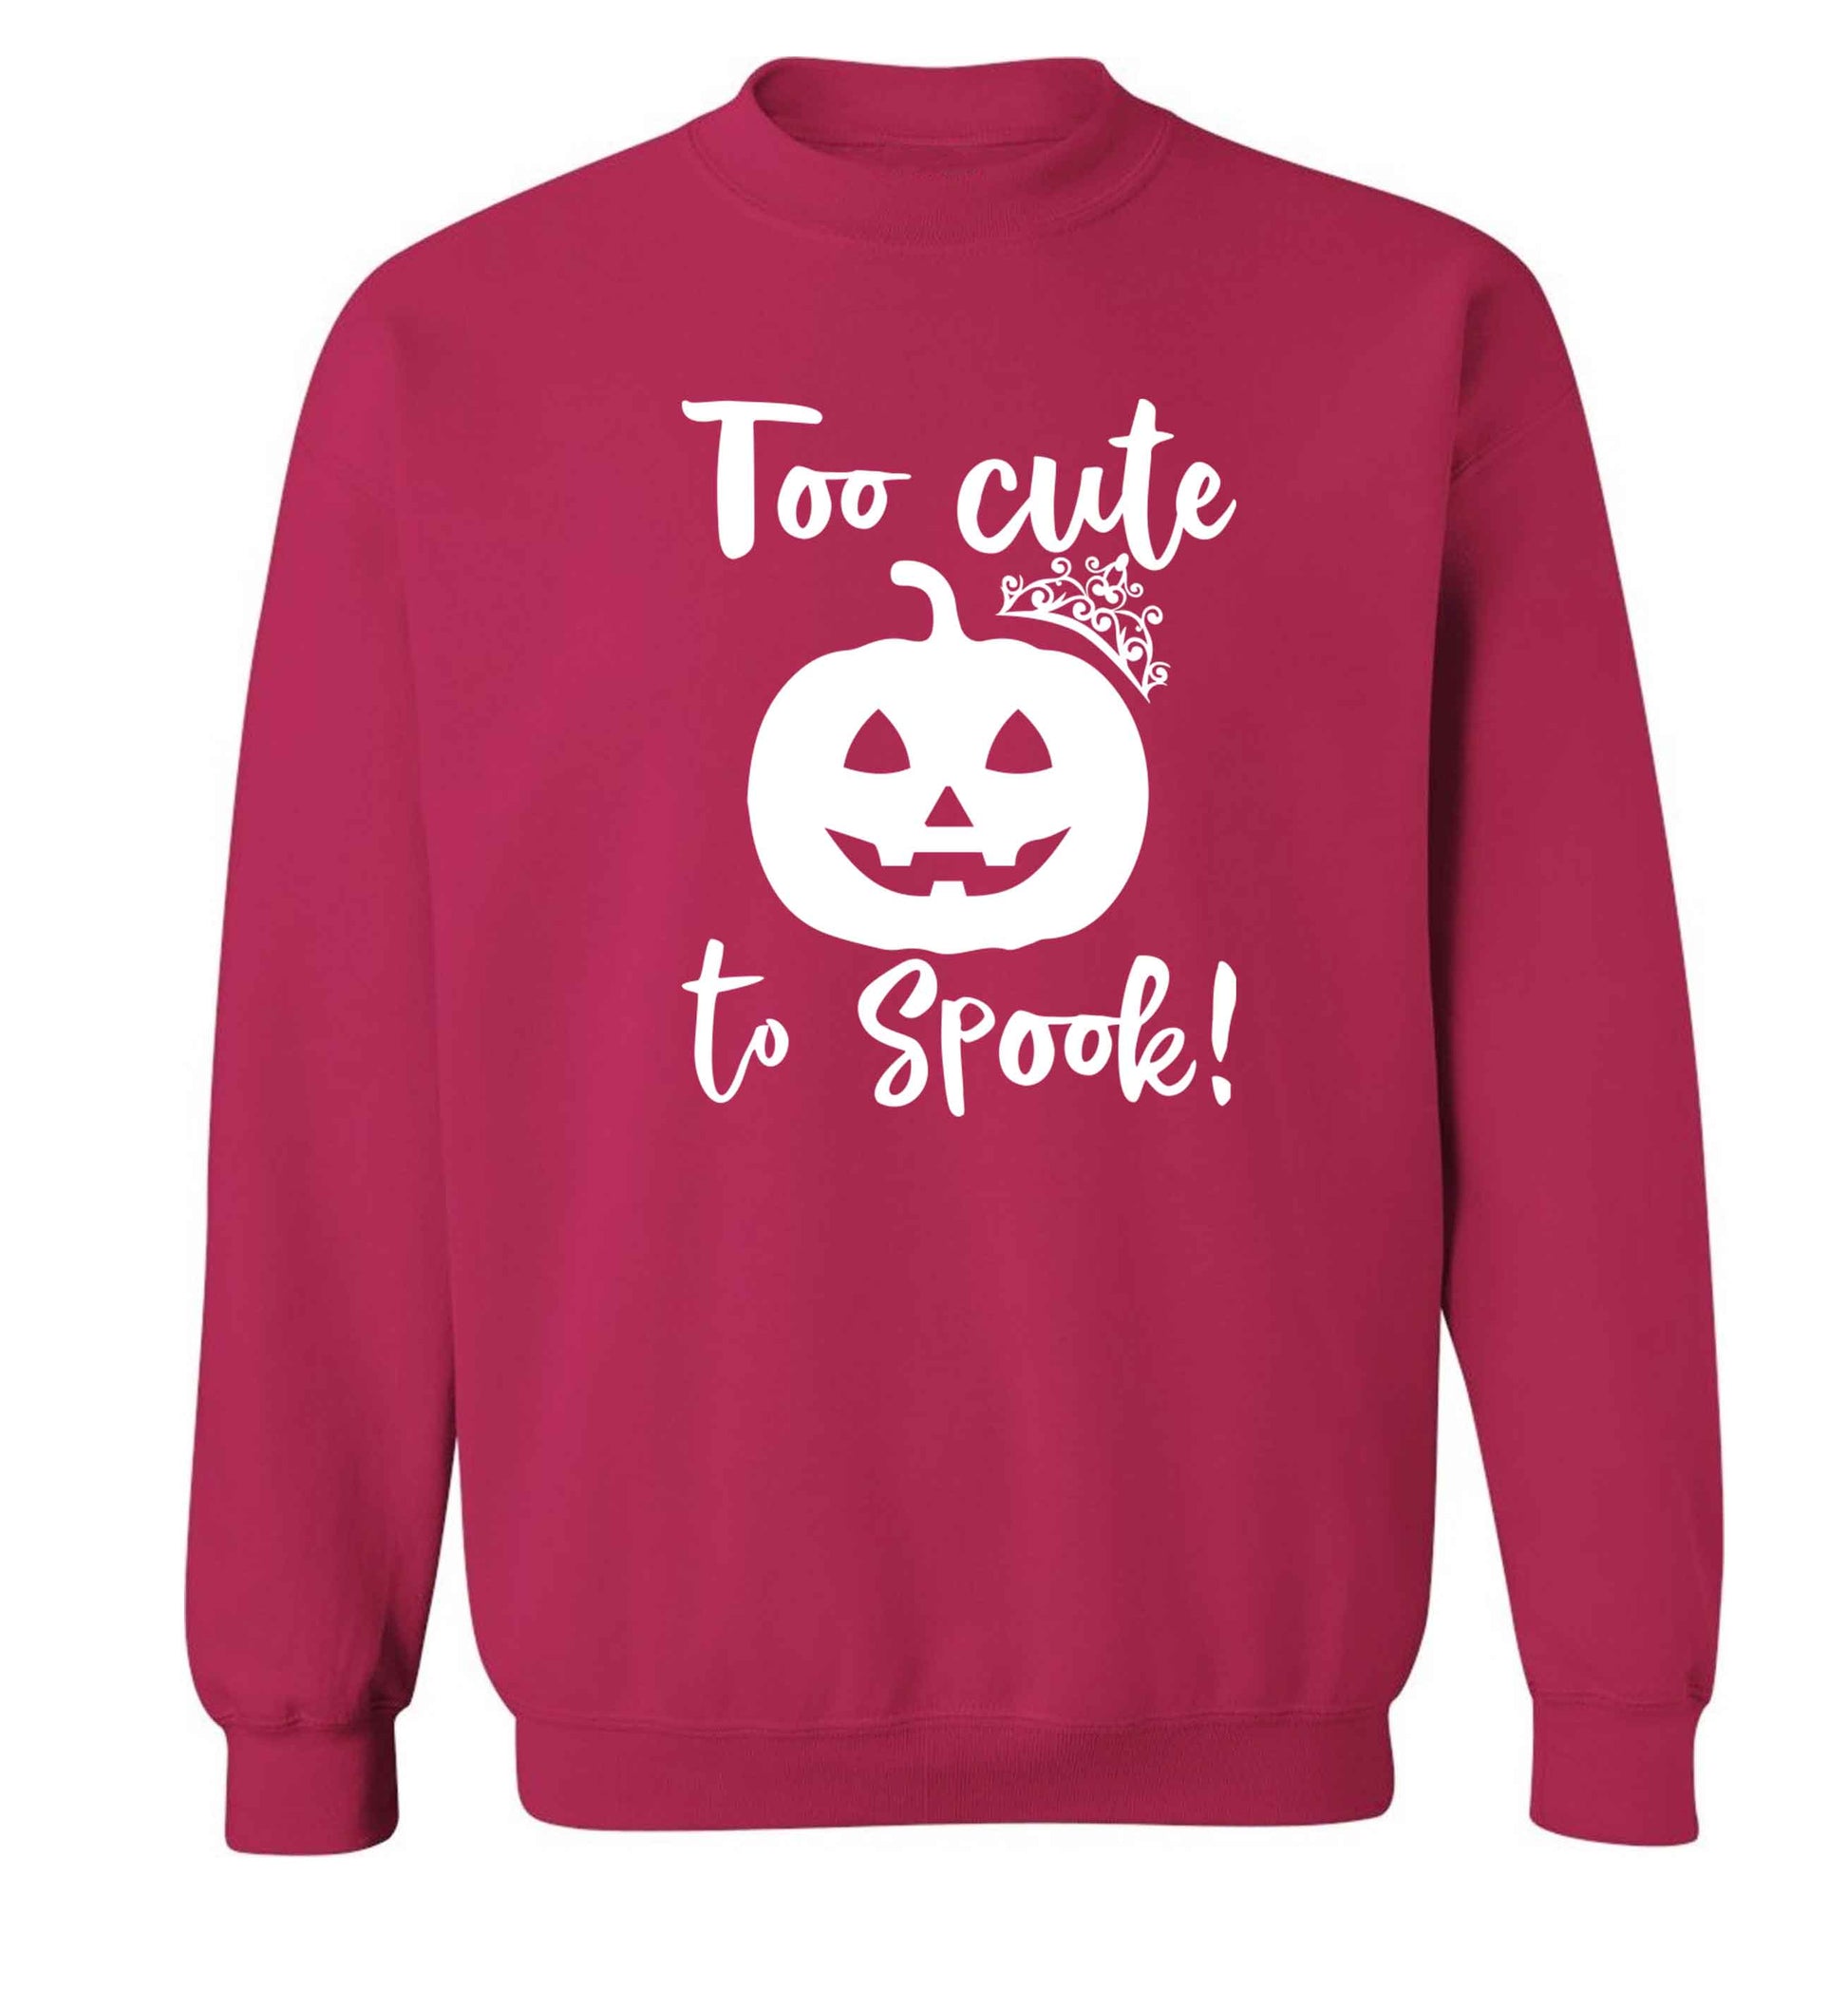 Too cute to spook! Adult's unisex pink Sweater 2XL